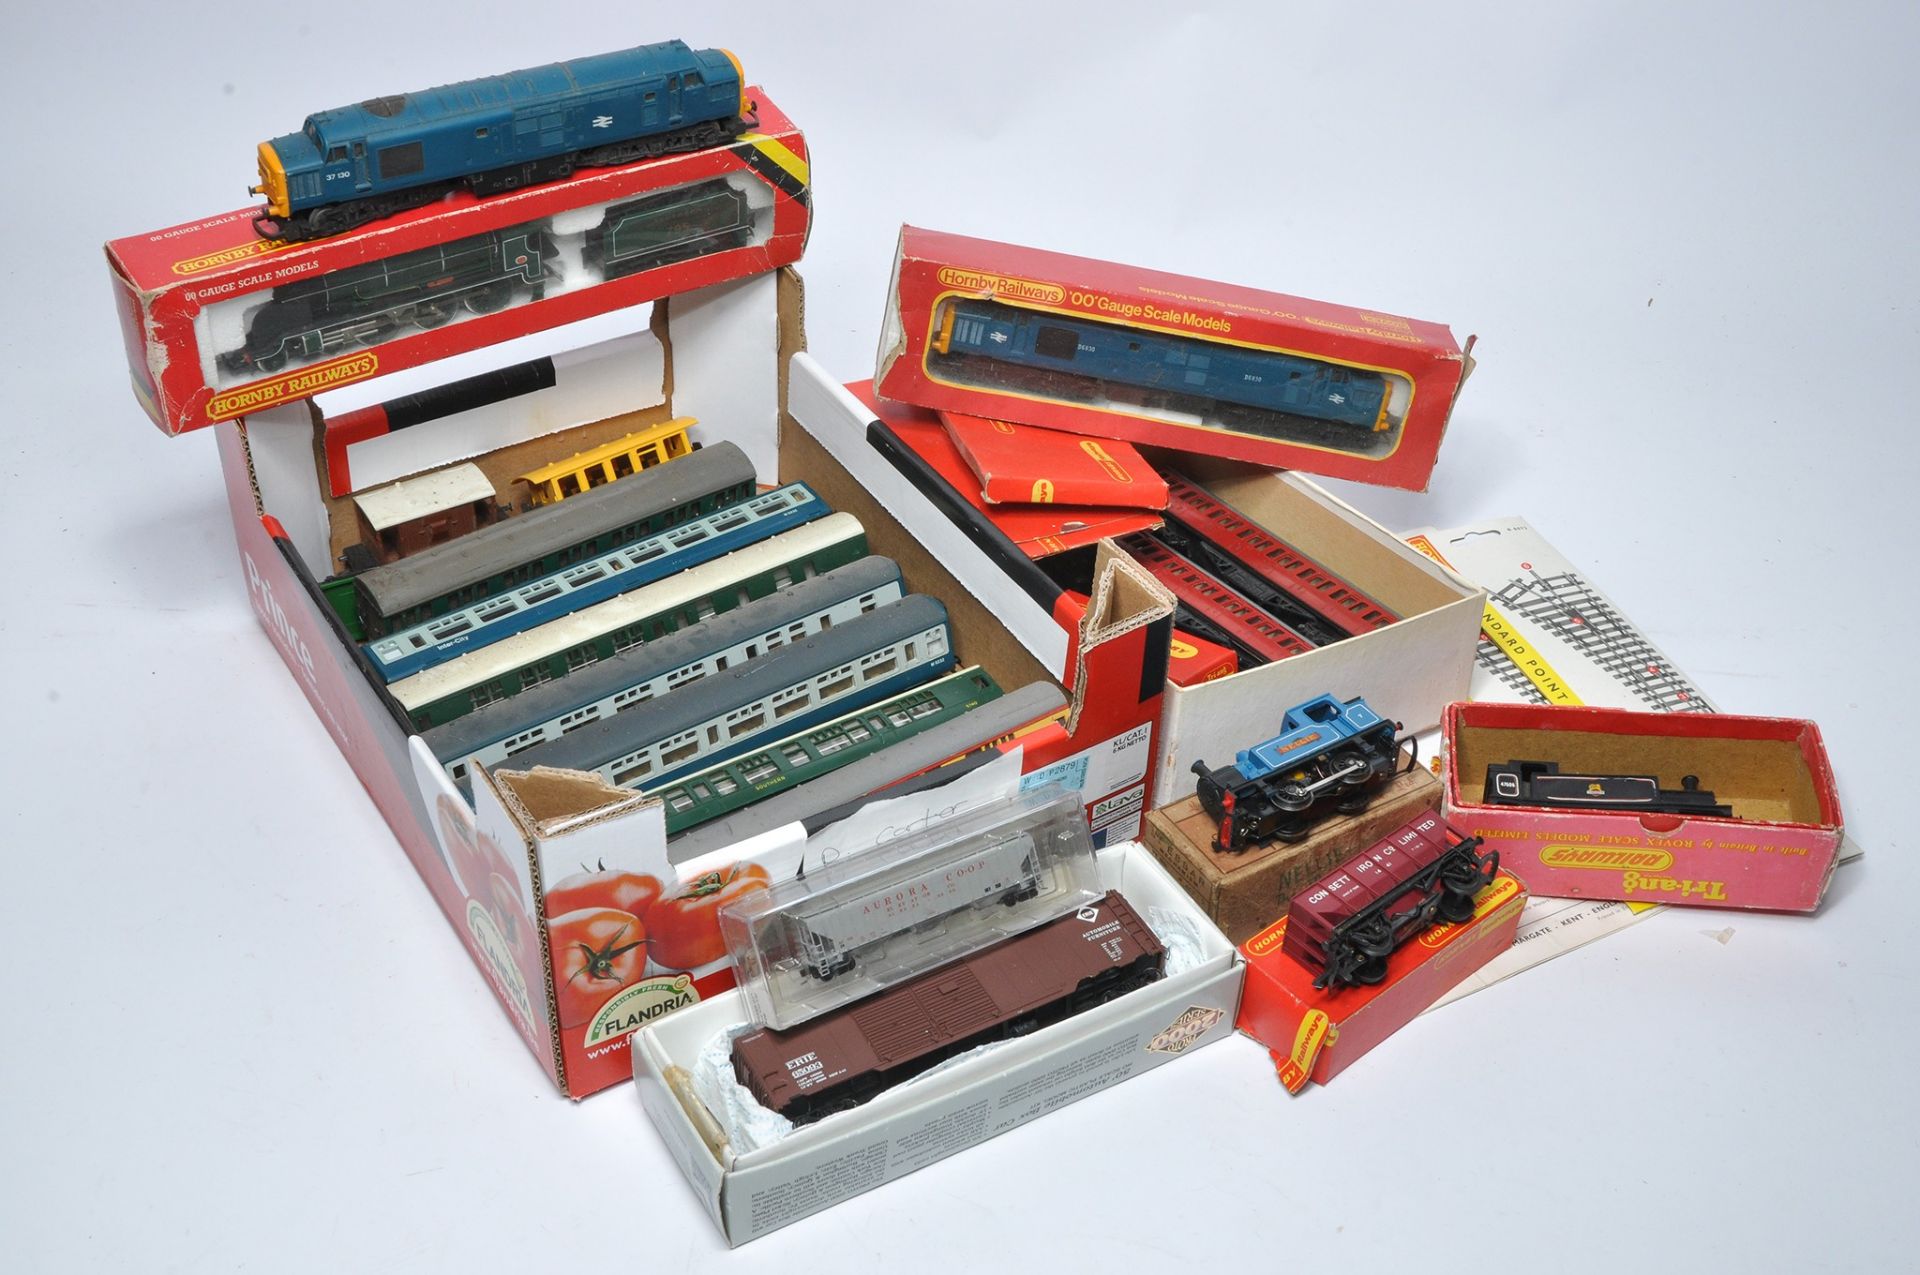 An assortment of various model railway issues including locomotives, rolling stock and track items